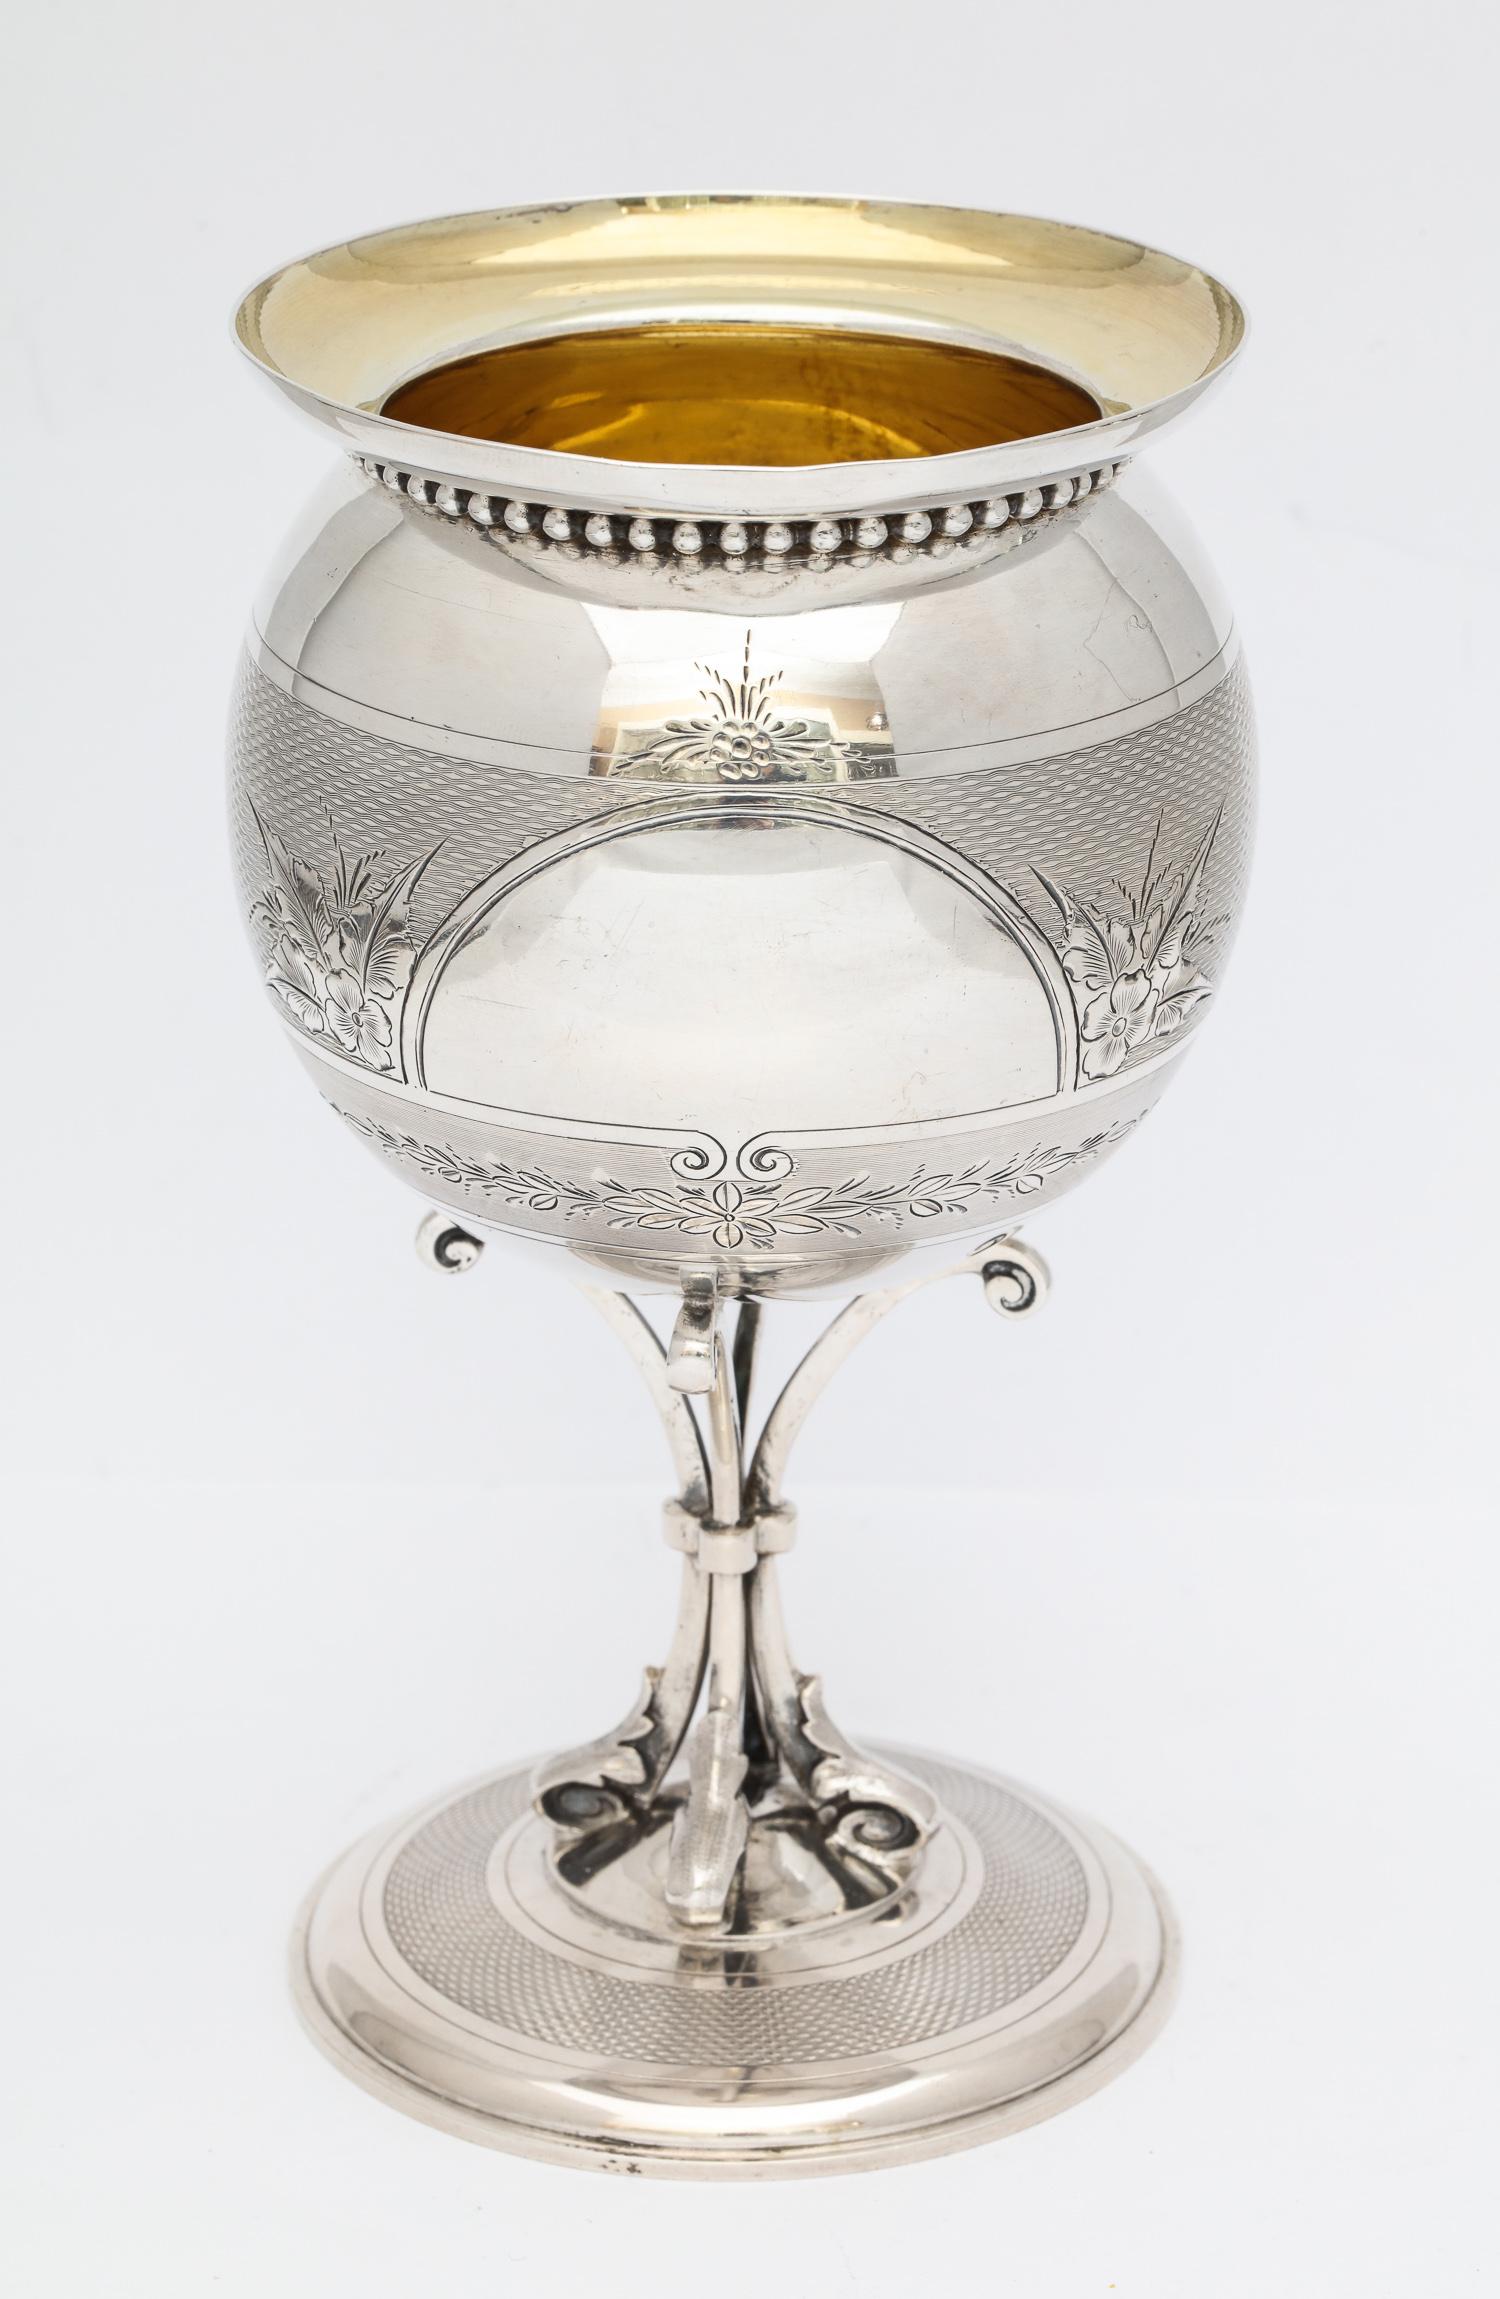 American, Neoclassical Coin Silver Vase by Gorham 4